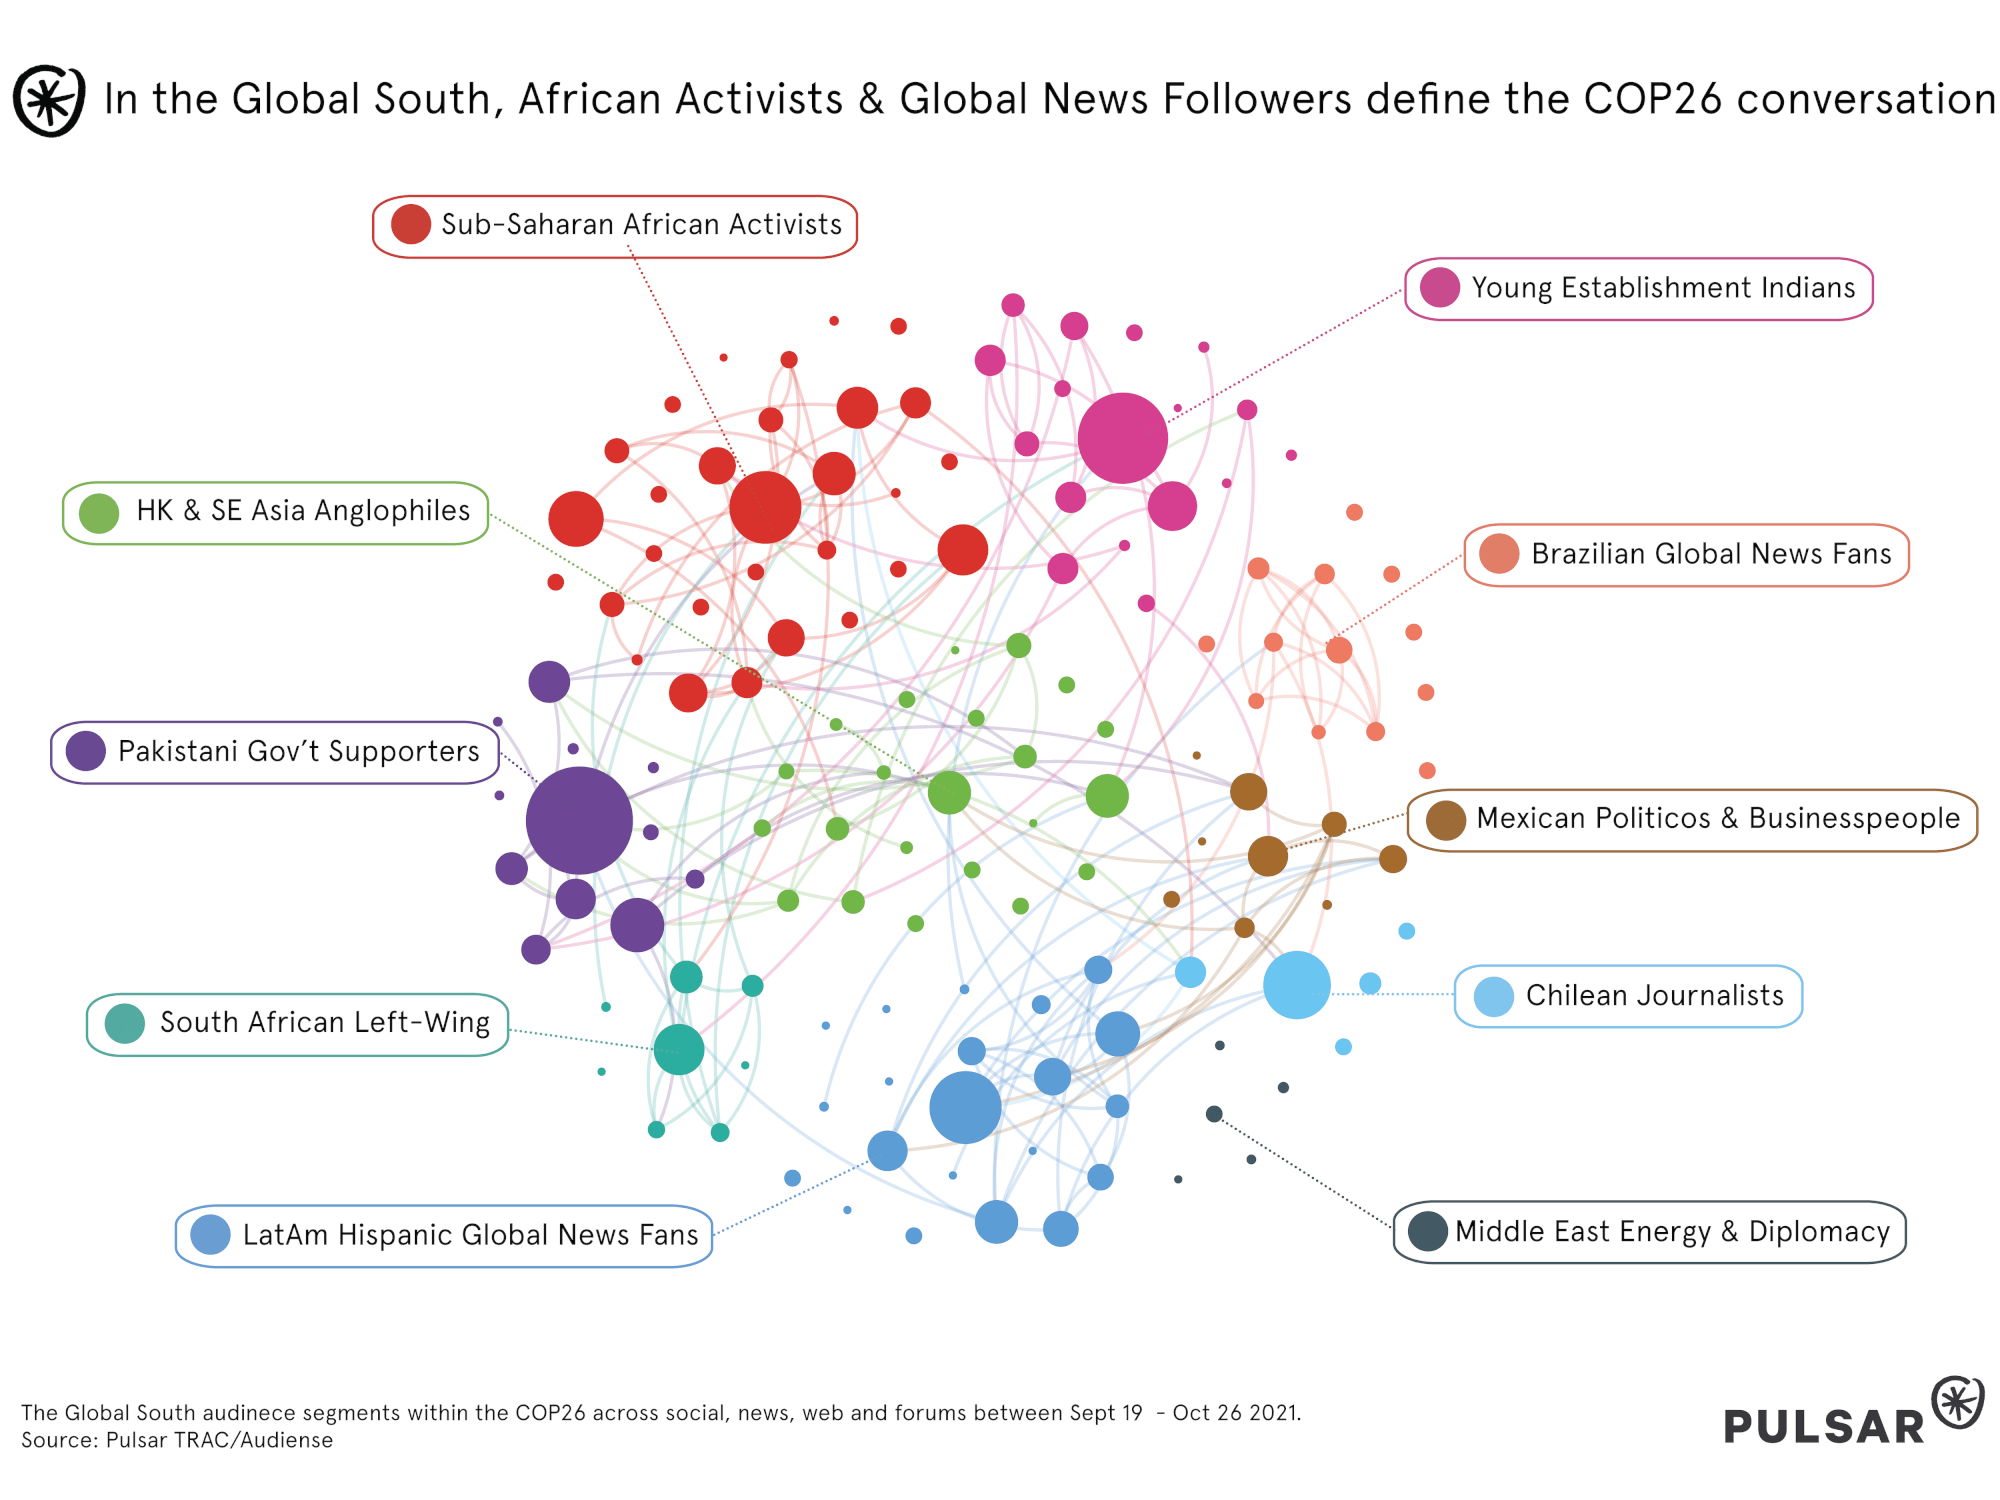 In the Global South, African Activists & Global News Followers define the COP26 conversation